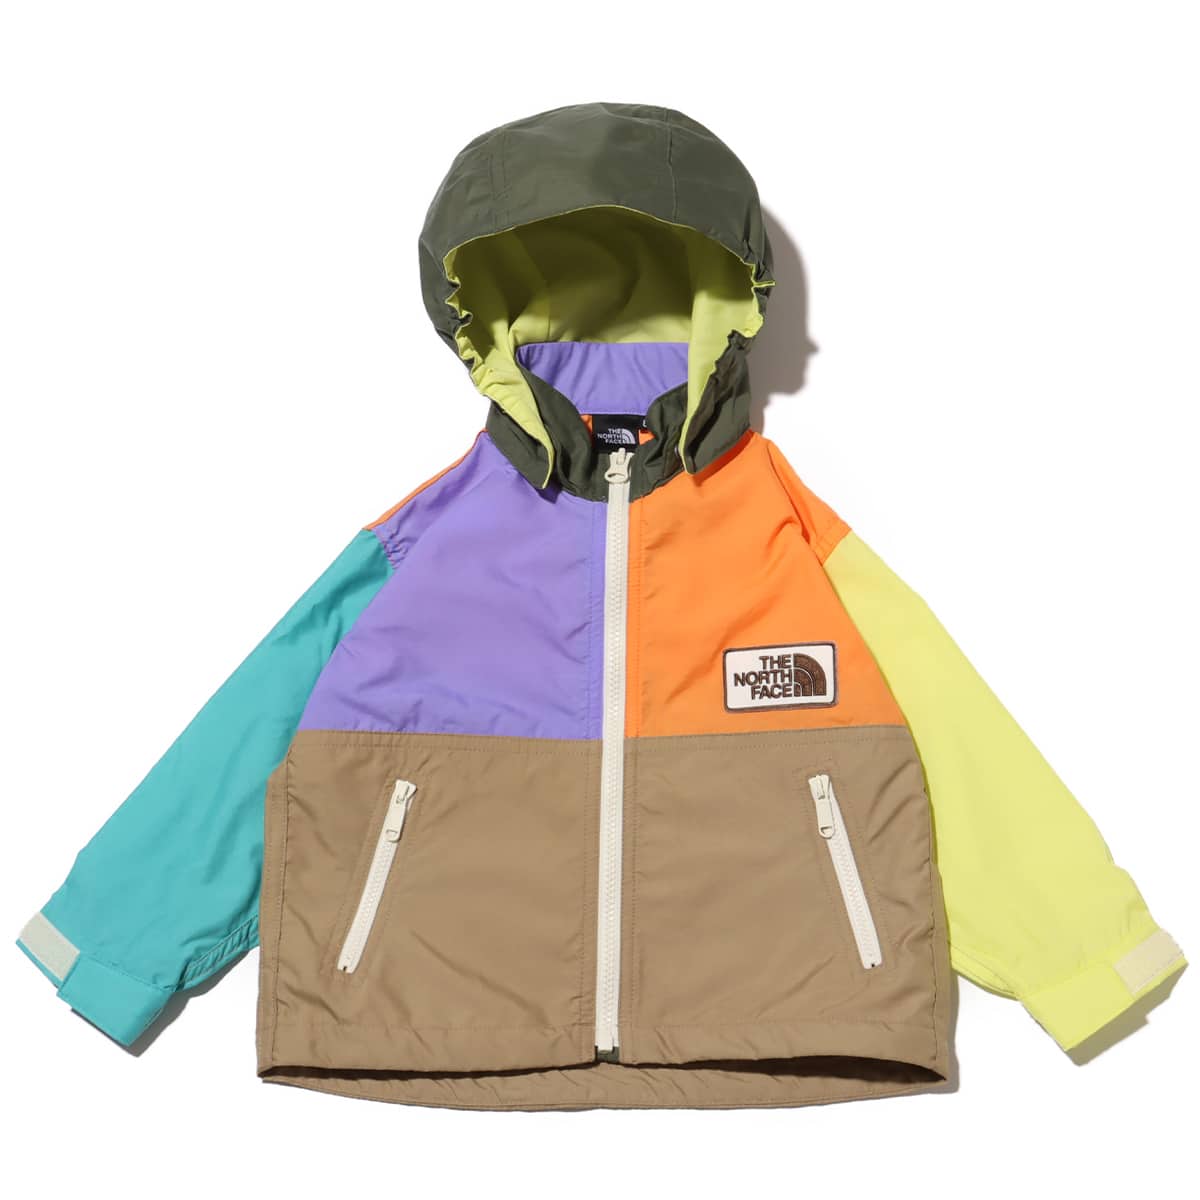 THE NORTH FACE Baby Grand Compact Jacket マルチカラー5 